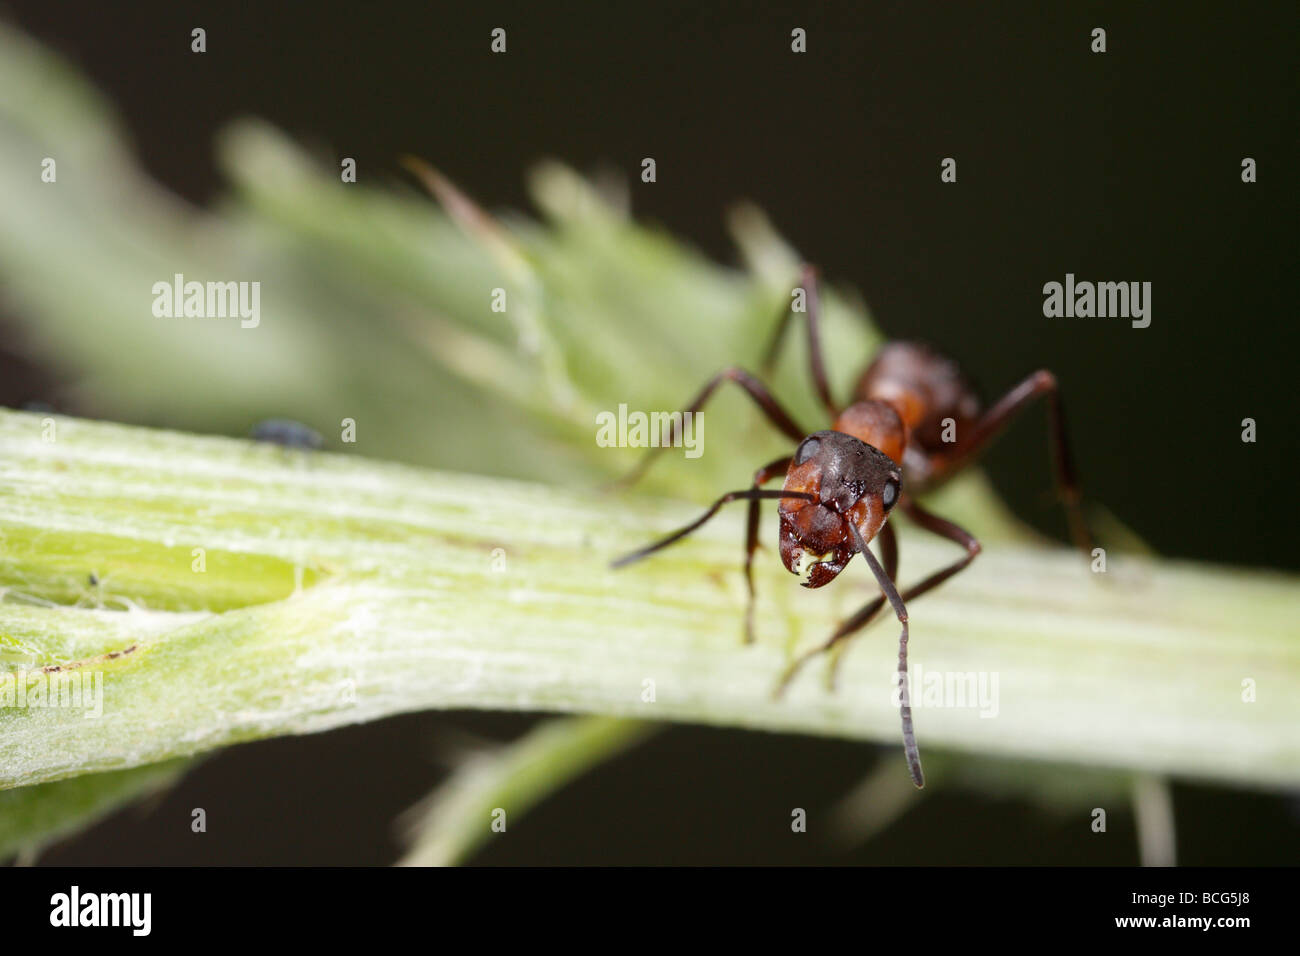 Horse ant (Formica rufa) on a plant stalk. The worker is looking up at the camera. Stock Photo